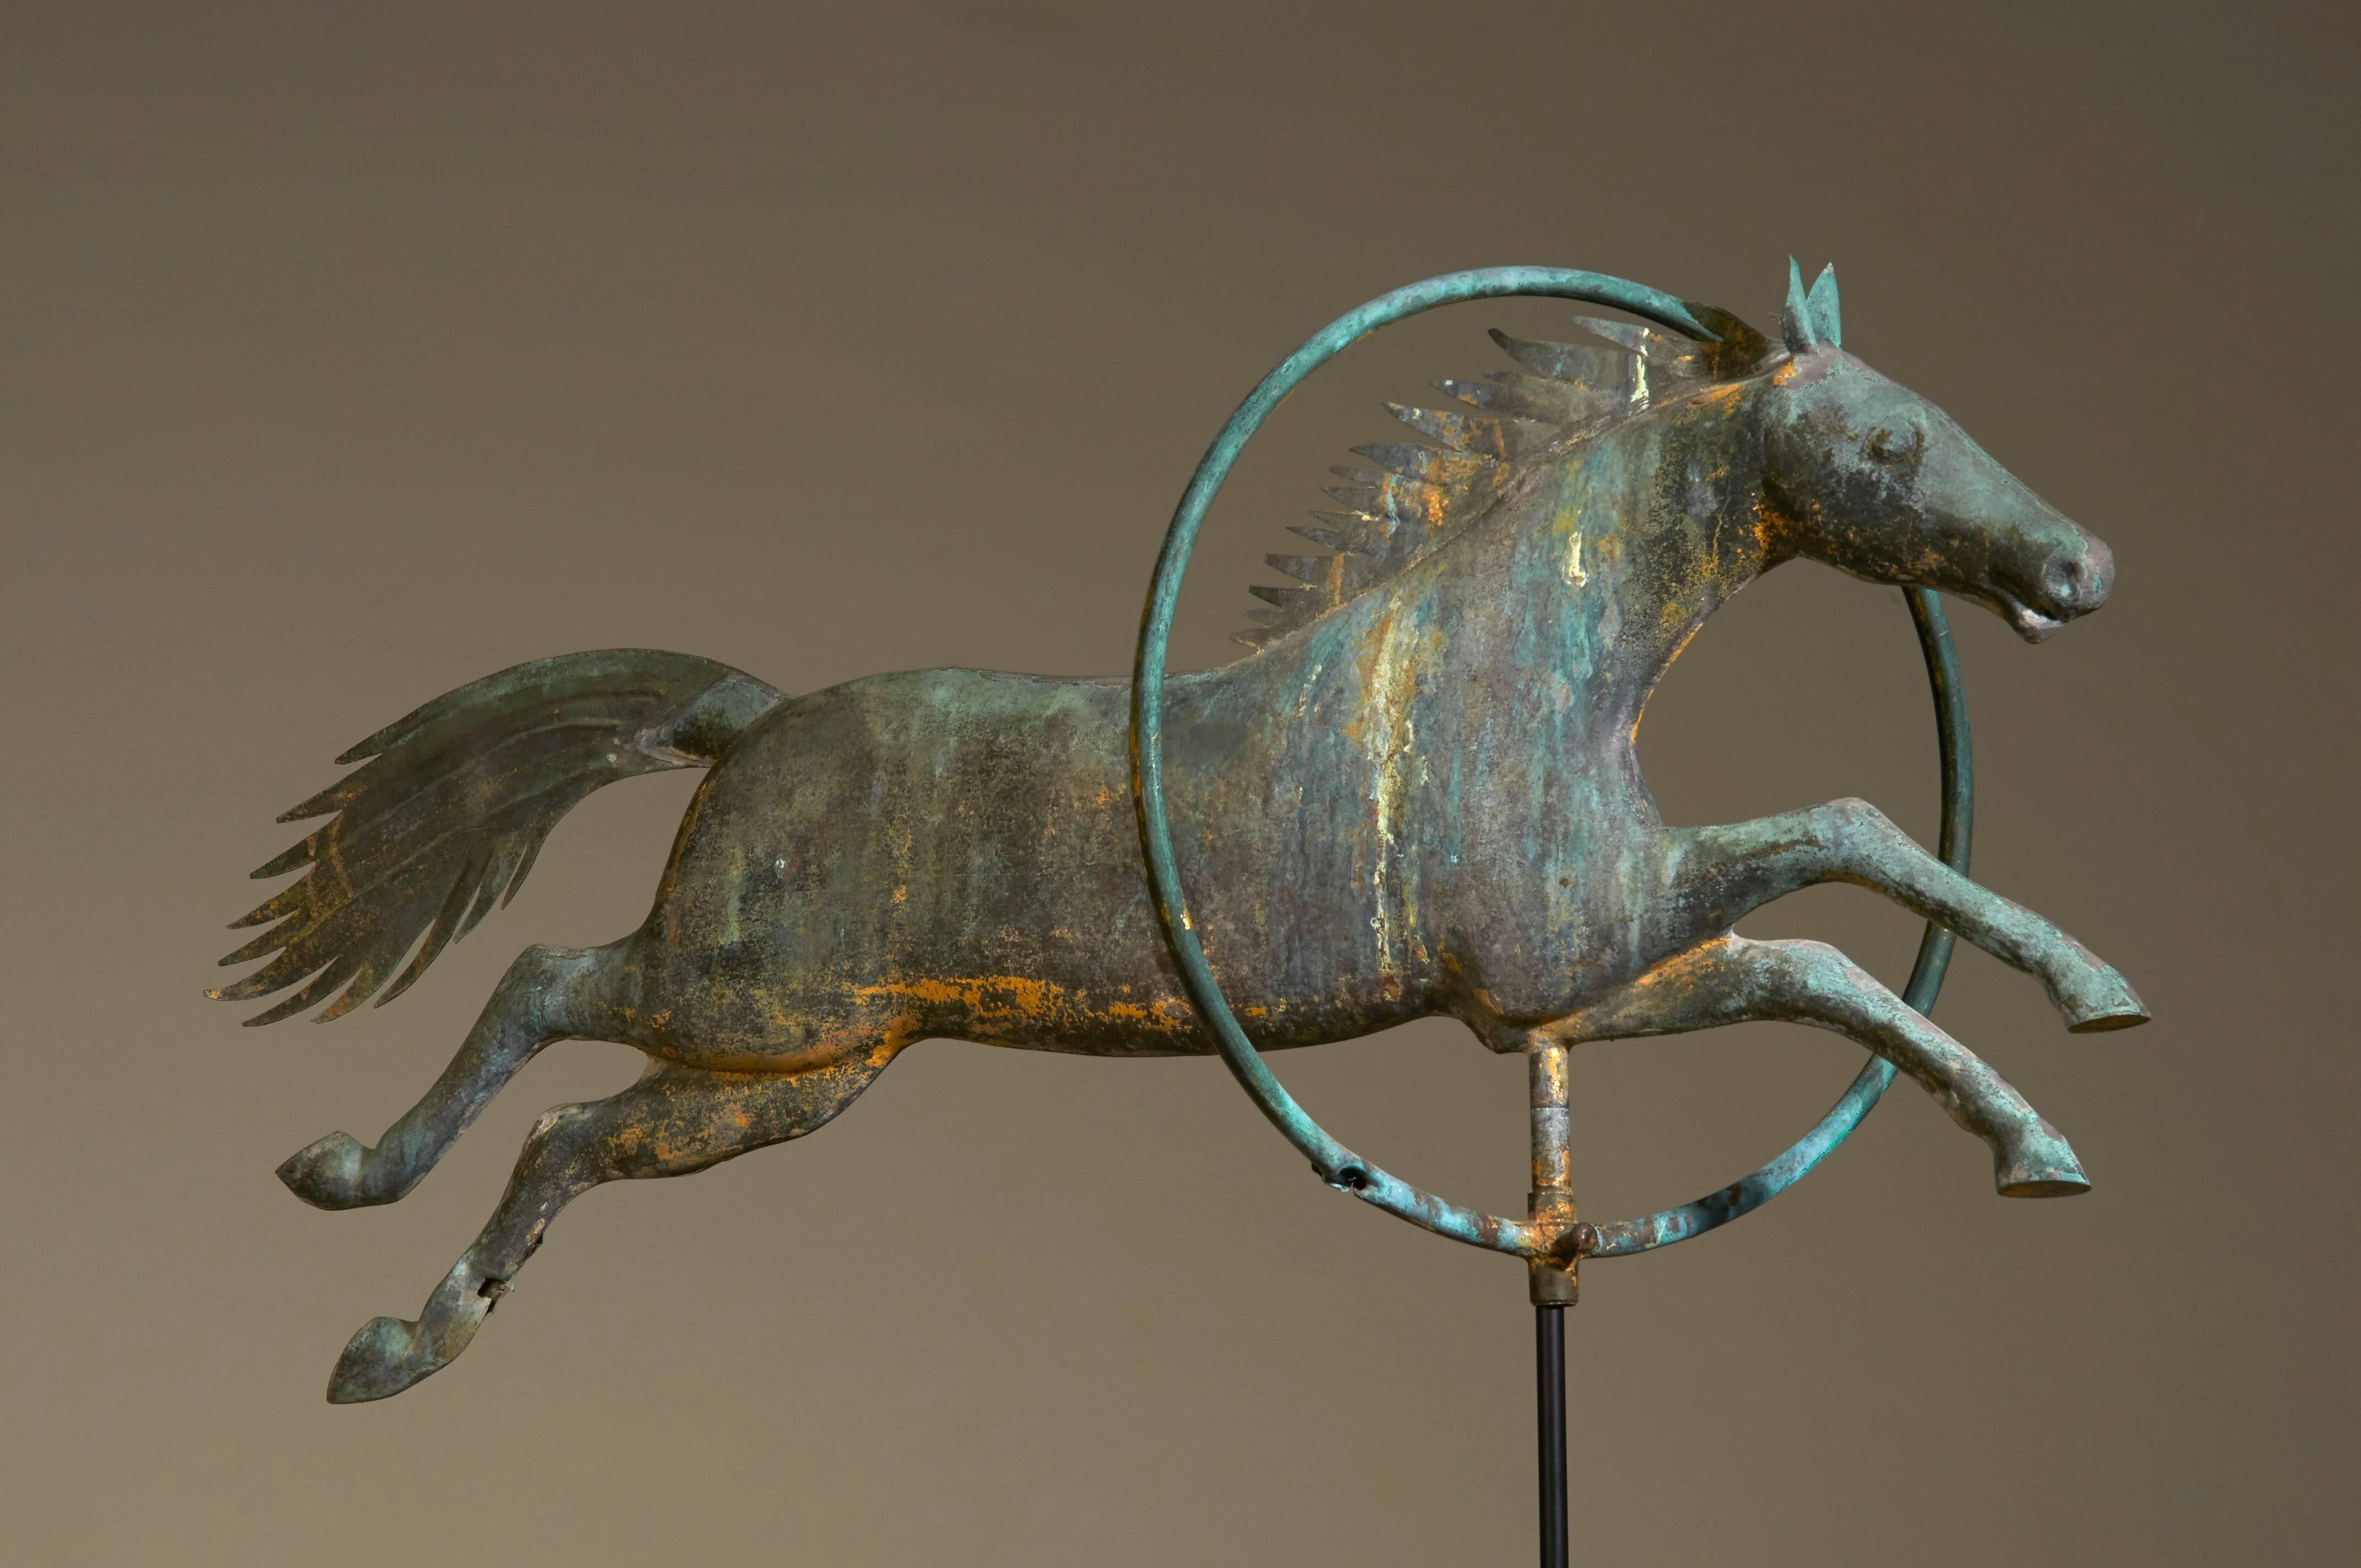 Attributed to A. L. Jewell & Co. (1852-1867) of Waltham, Massachusetts, this molded copper weathervane of a flattened full-body horse jumping through a hoop is a superlative example of a rare form. It retains a fine Verdigris surface showing